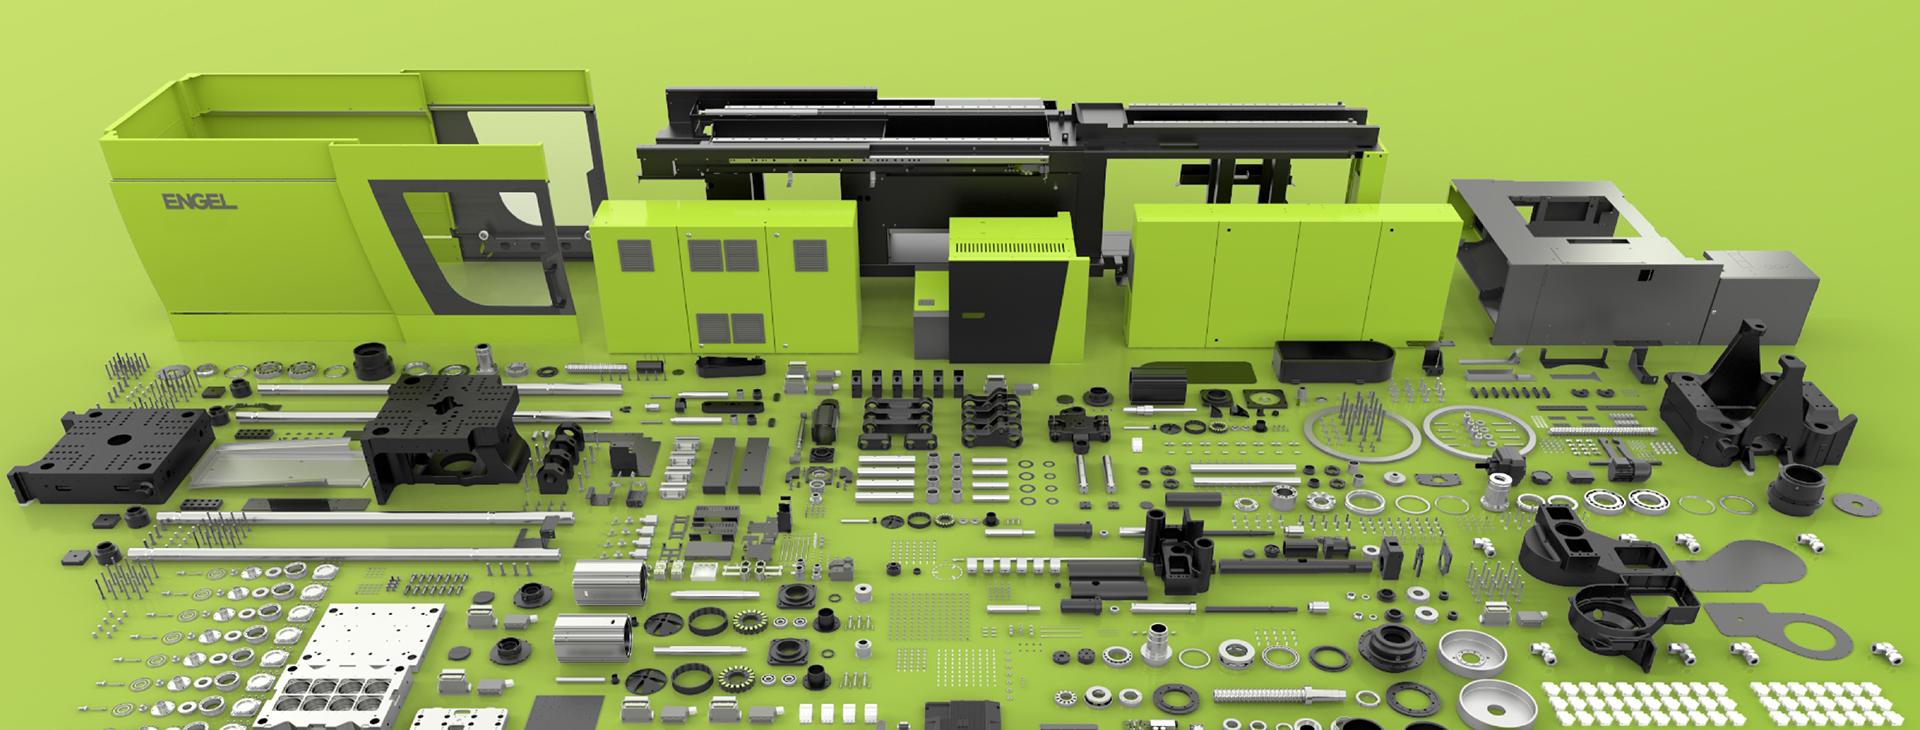 3d render compilation of ENGEL machinery parts